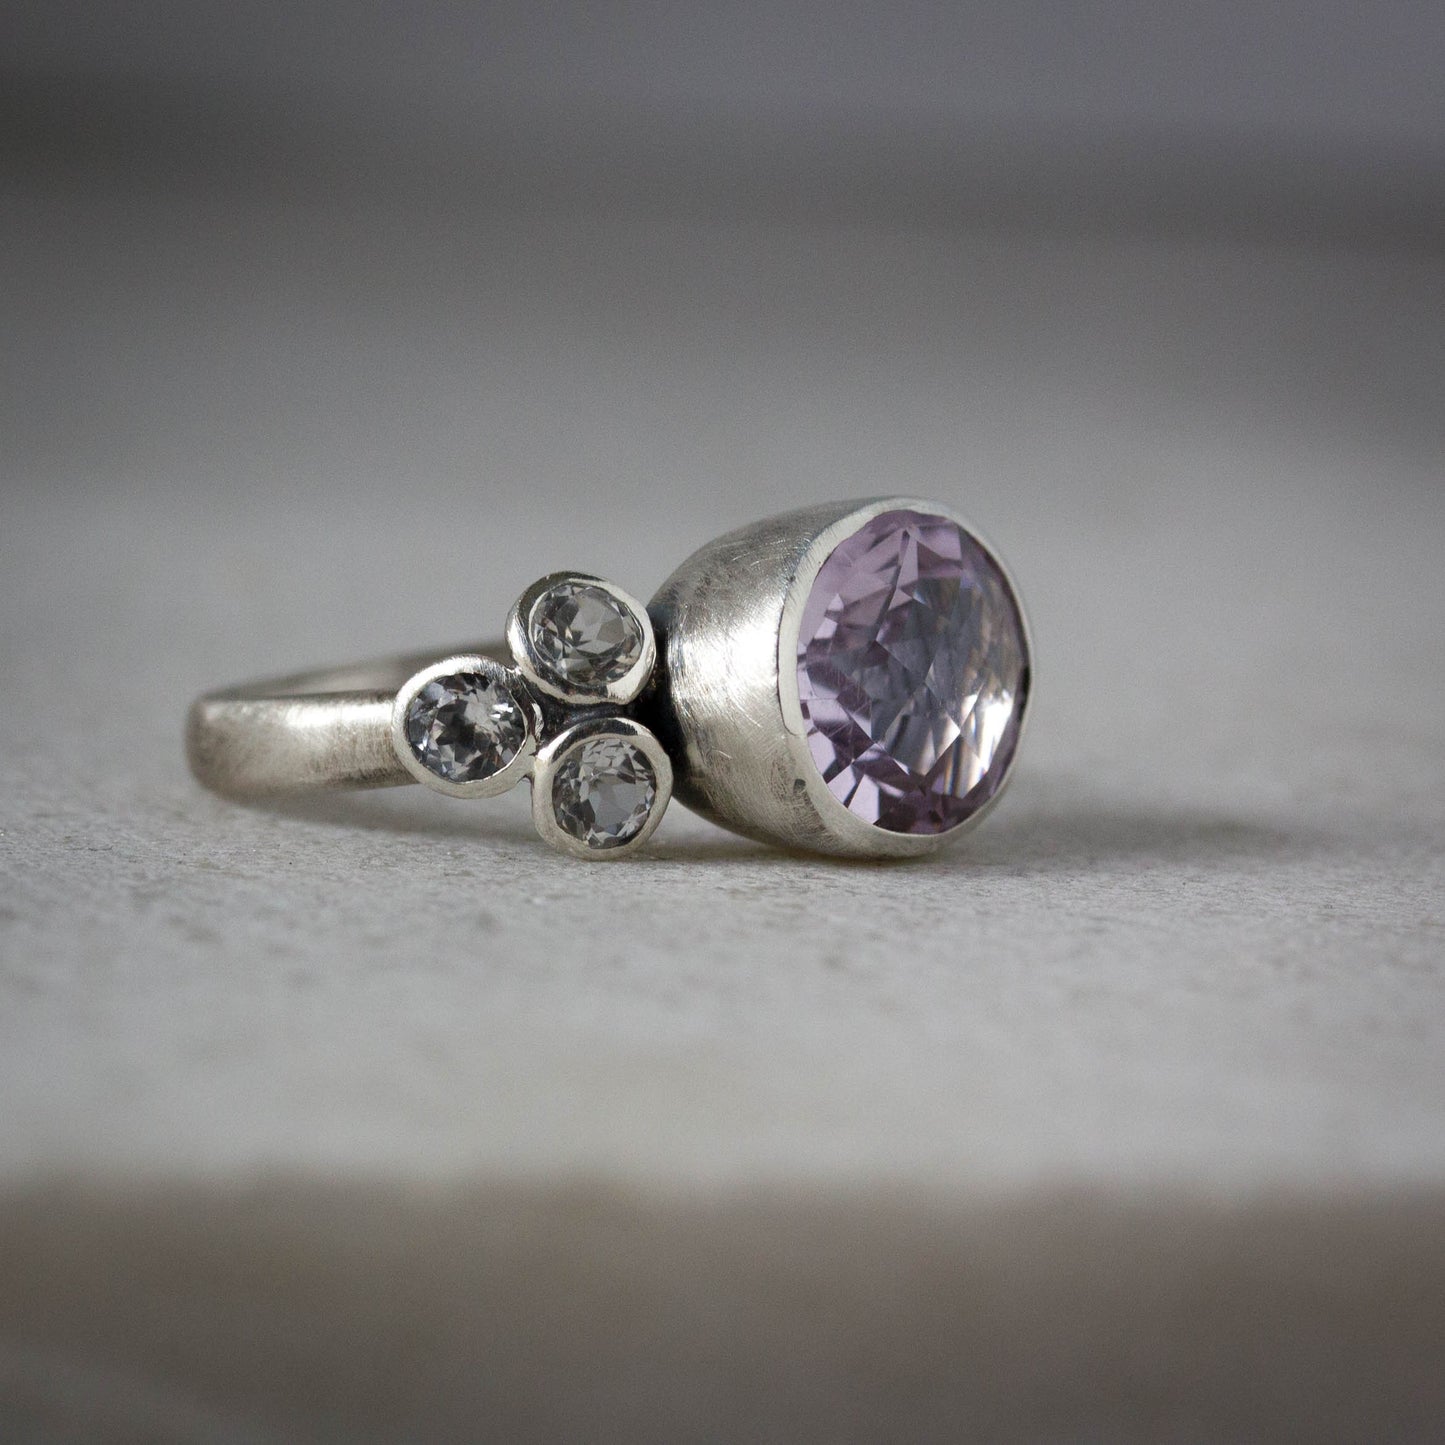 Handmade Cassin Jewelry featuring a Rose De France Amethyst and diamond ring.